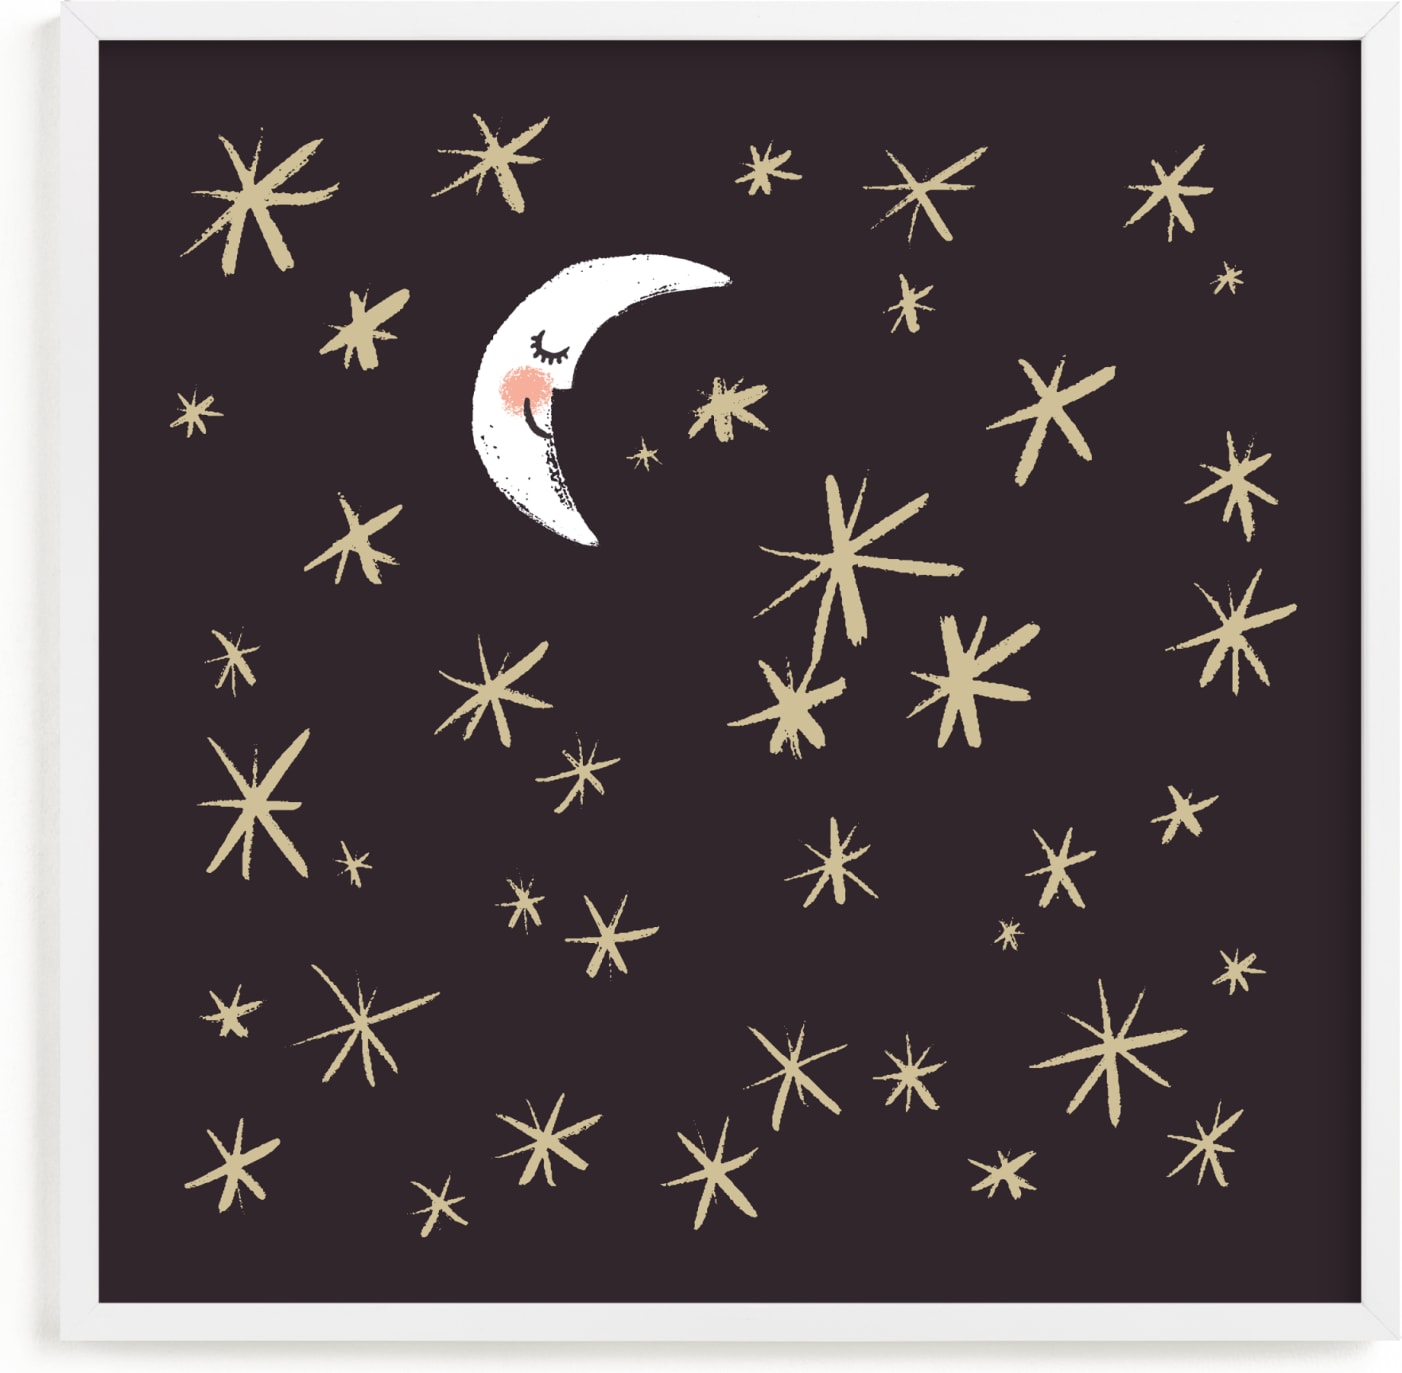 This is a black and white kids wall art by Patrice Horvath called Good Night Moon and Stars.